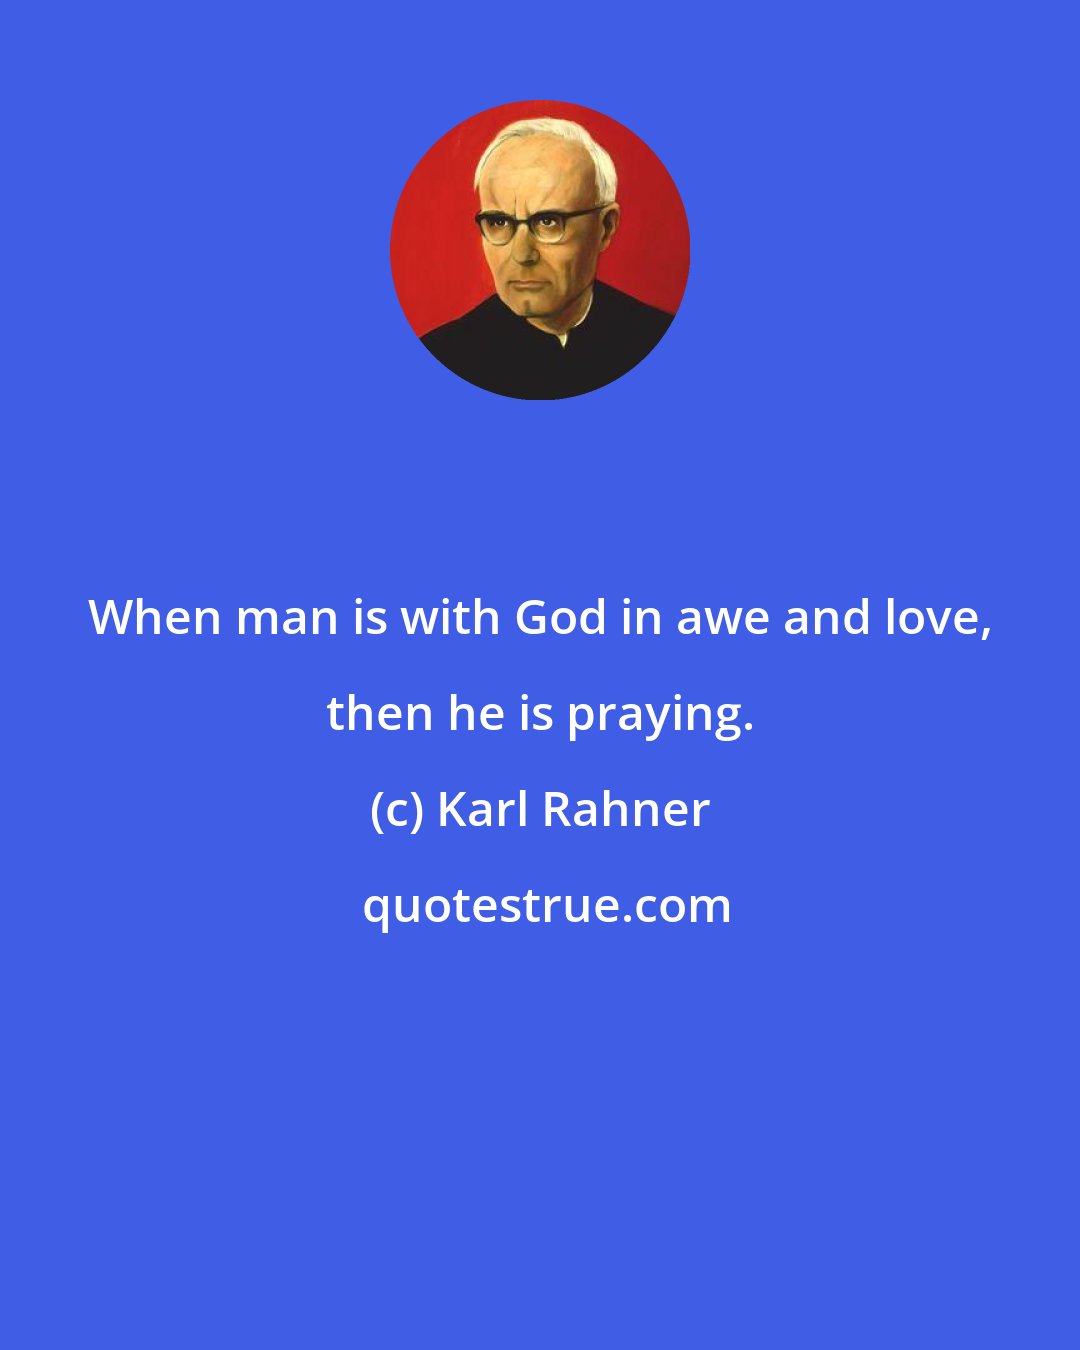 Karl Rahner: When man is with God in awe and love, then he is praying.